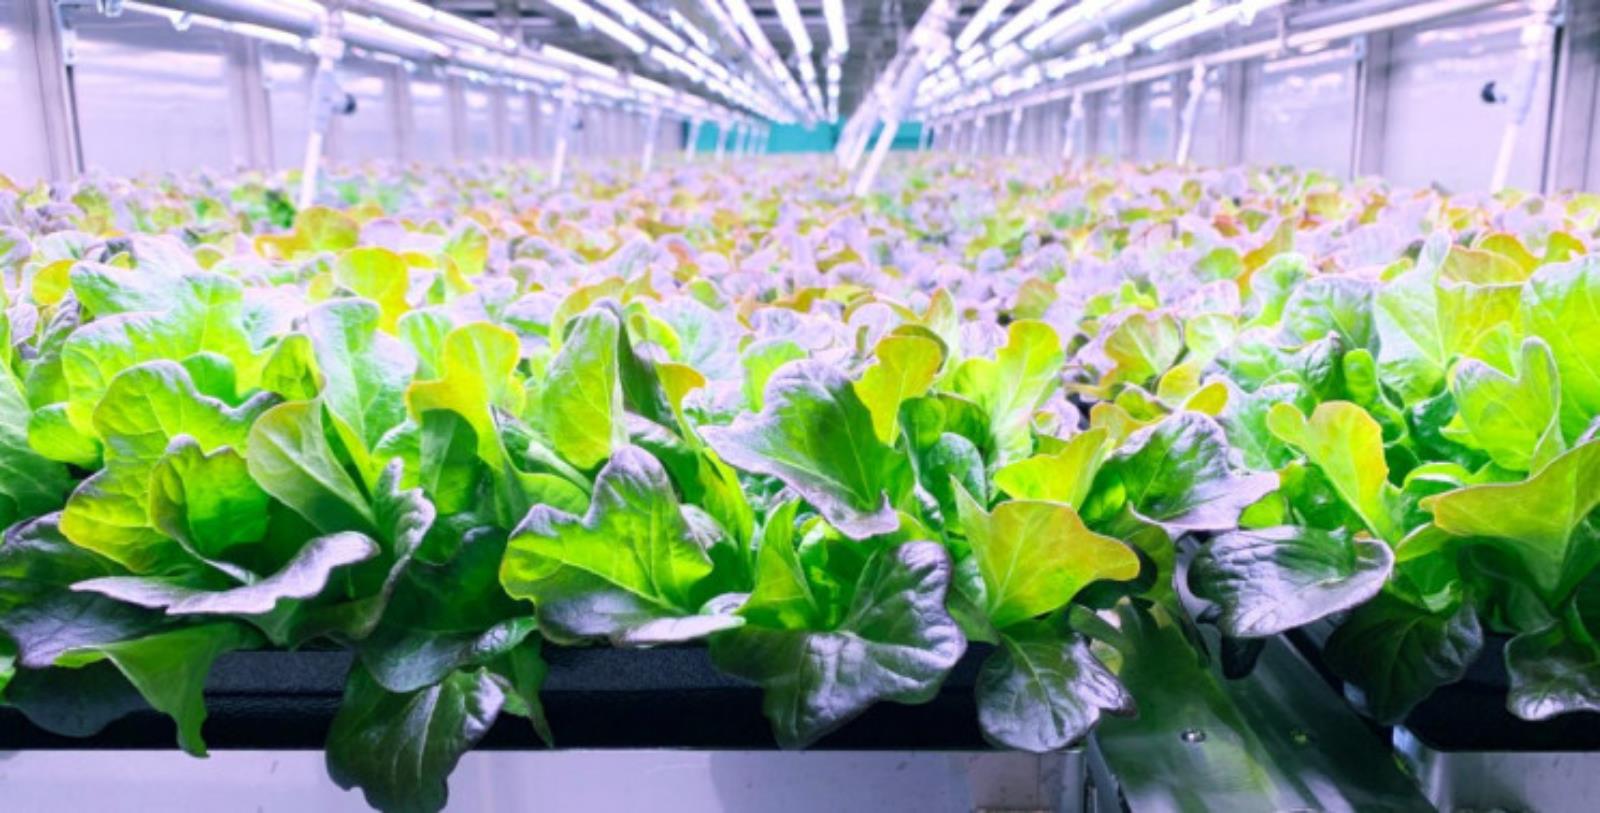 Vertical crops - the future?  Vertical farms have great potential